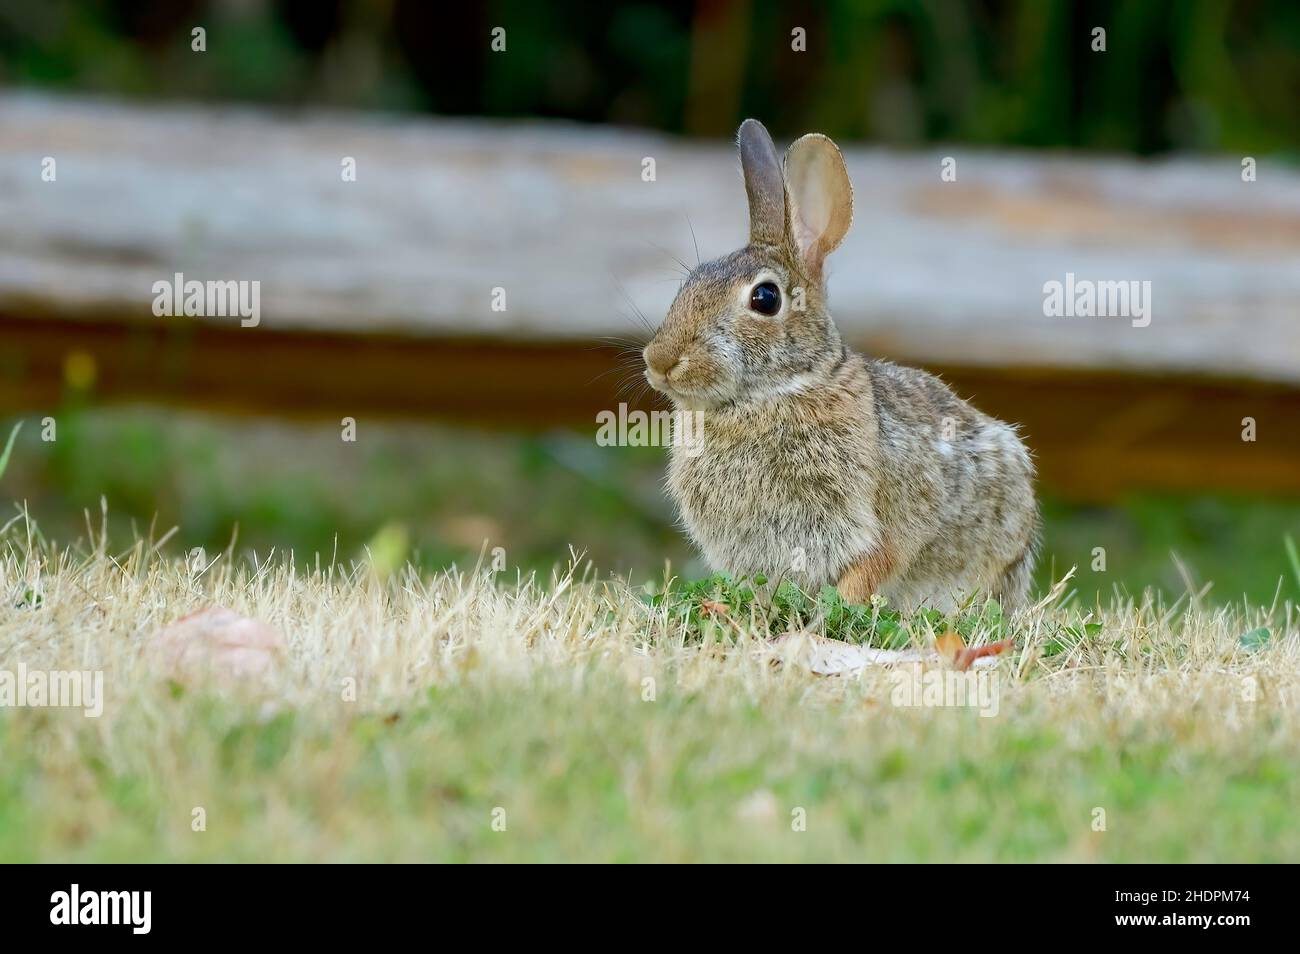 A wild Eastern Cottontail Rabbit 'Sylvilagus floridanus', sitting in a grassy area on Vancouver Island British Columbia Canada. Stock Photo